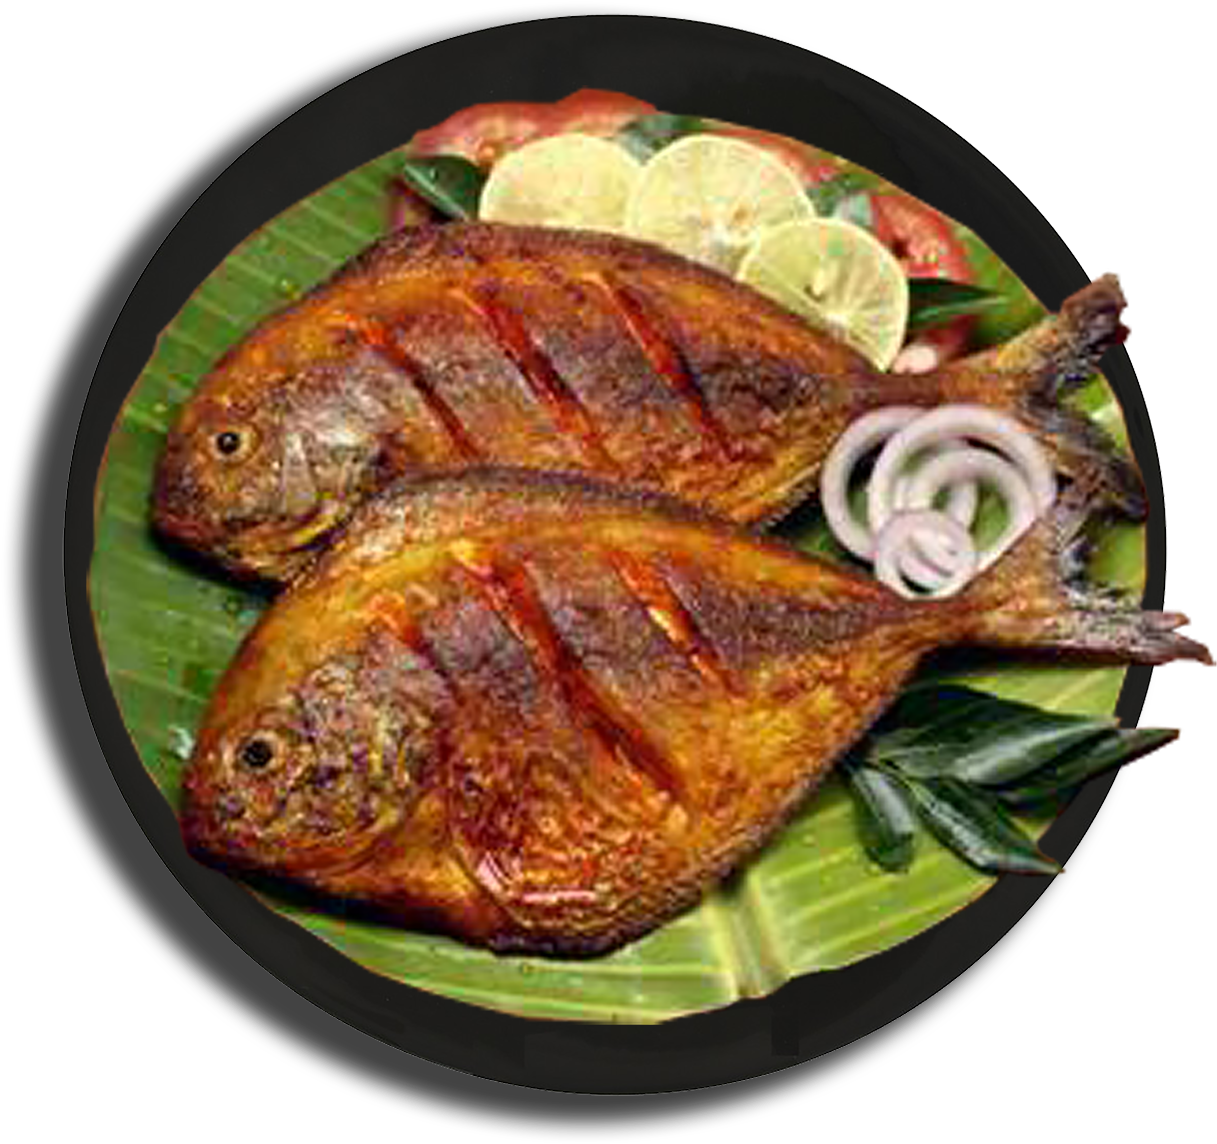 Photos Fish Spicy Fried HQ Image Free PNG Image